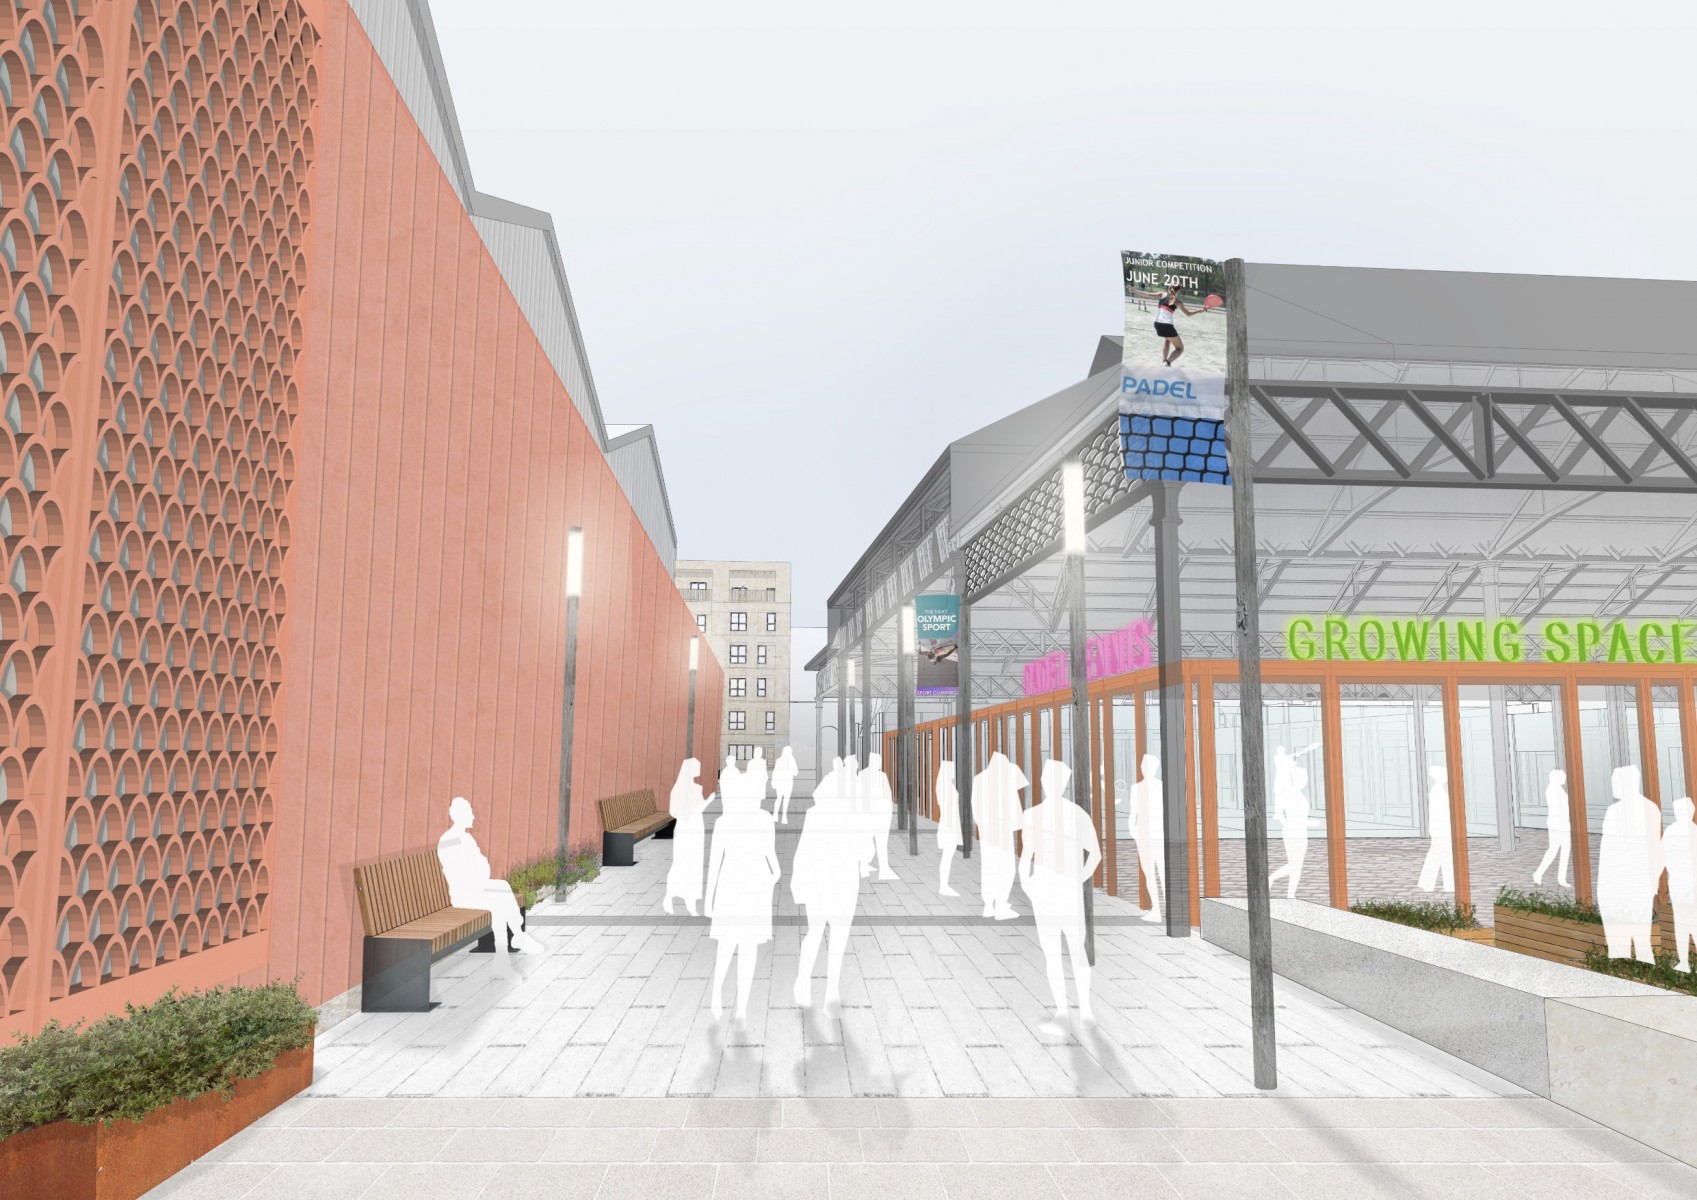 Details unveiled to regenerate Glasgow’s Meat Market sheds